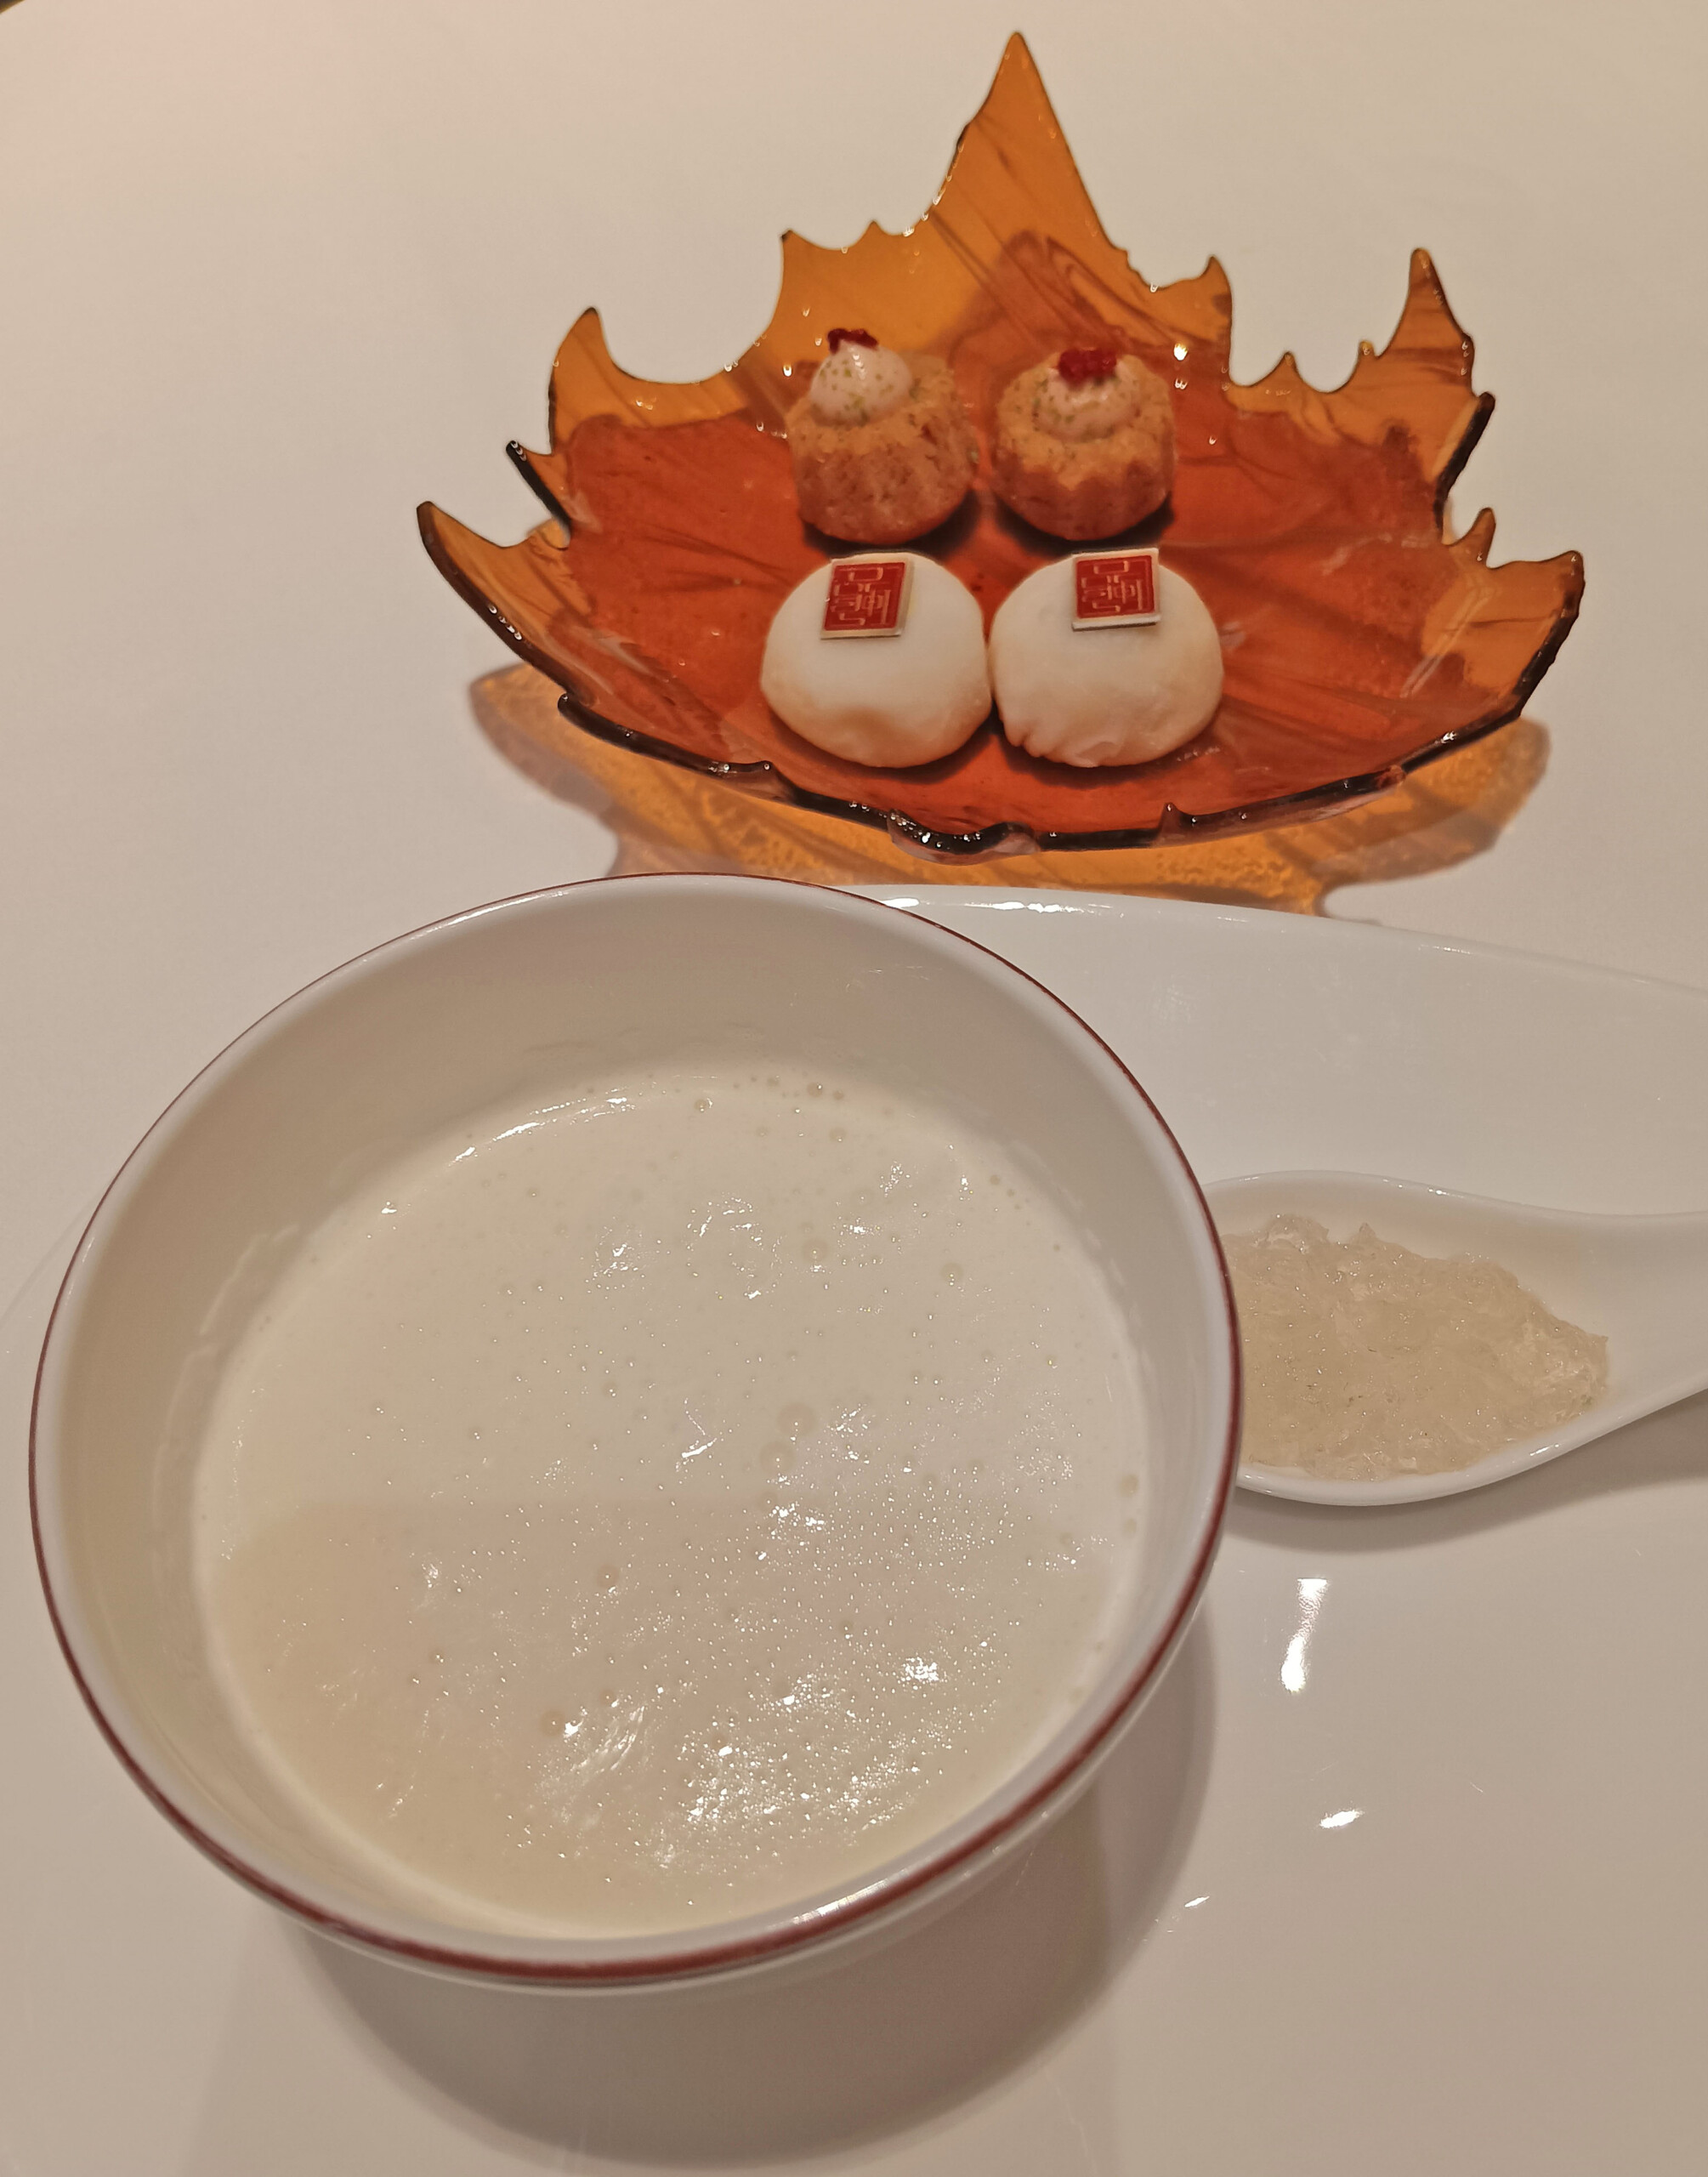 Almond pudding with bird's nest, and two cookies